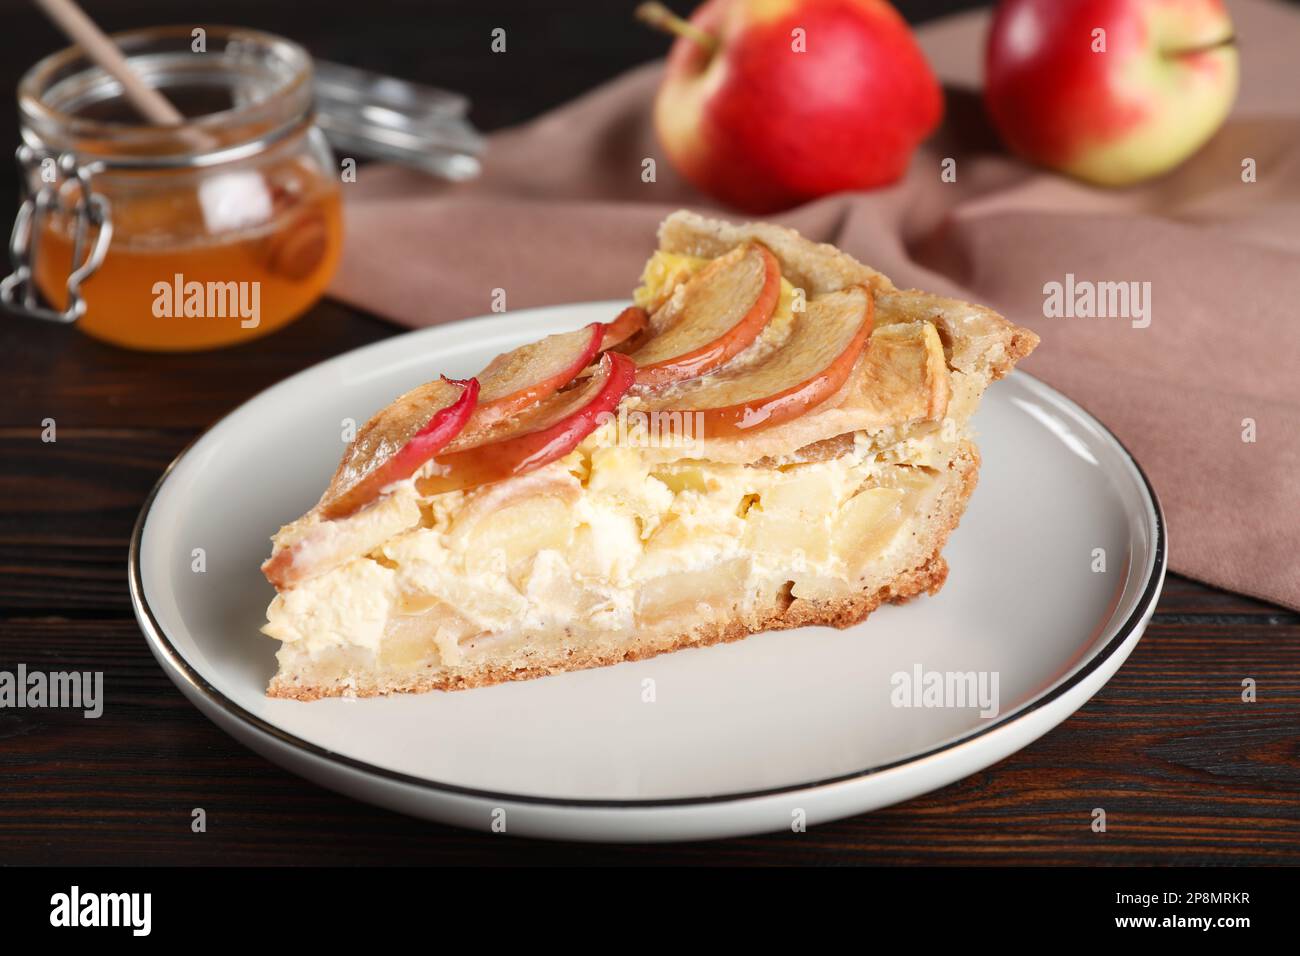 Piece of delicious homemade apple pie on wooden table Stock Photo